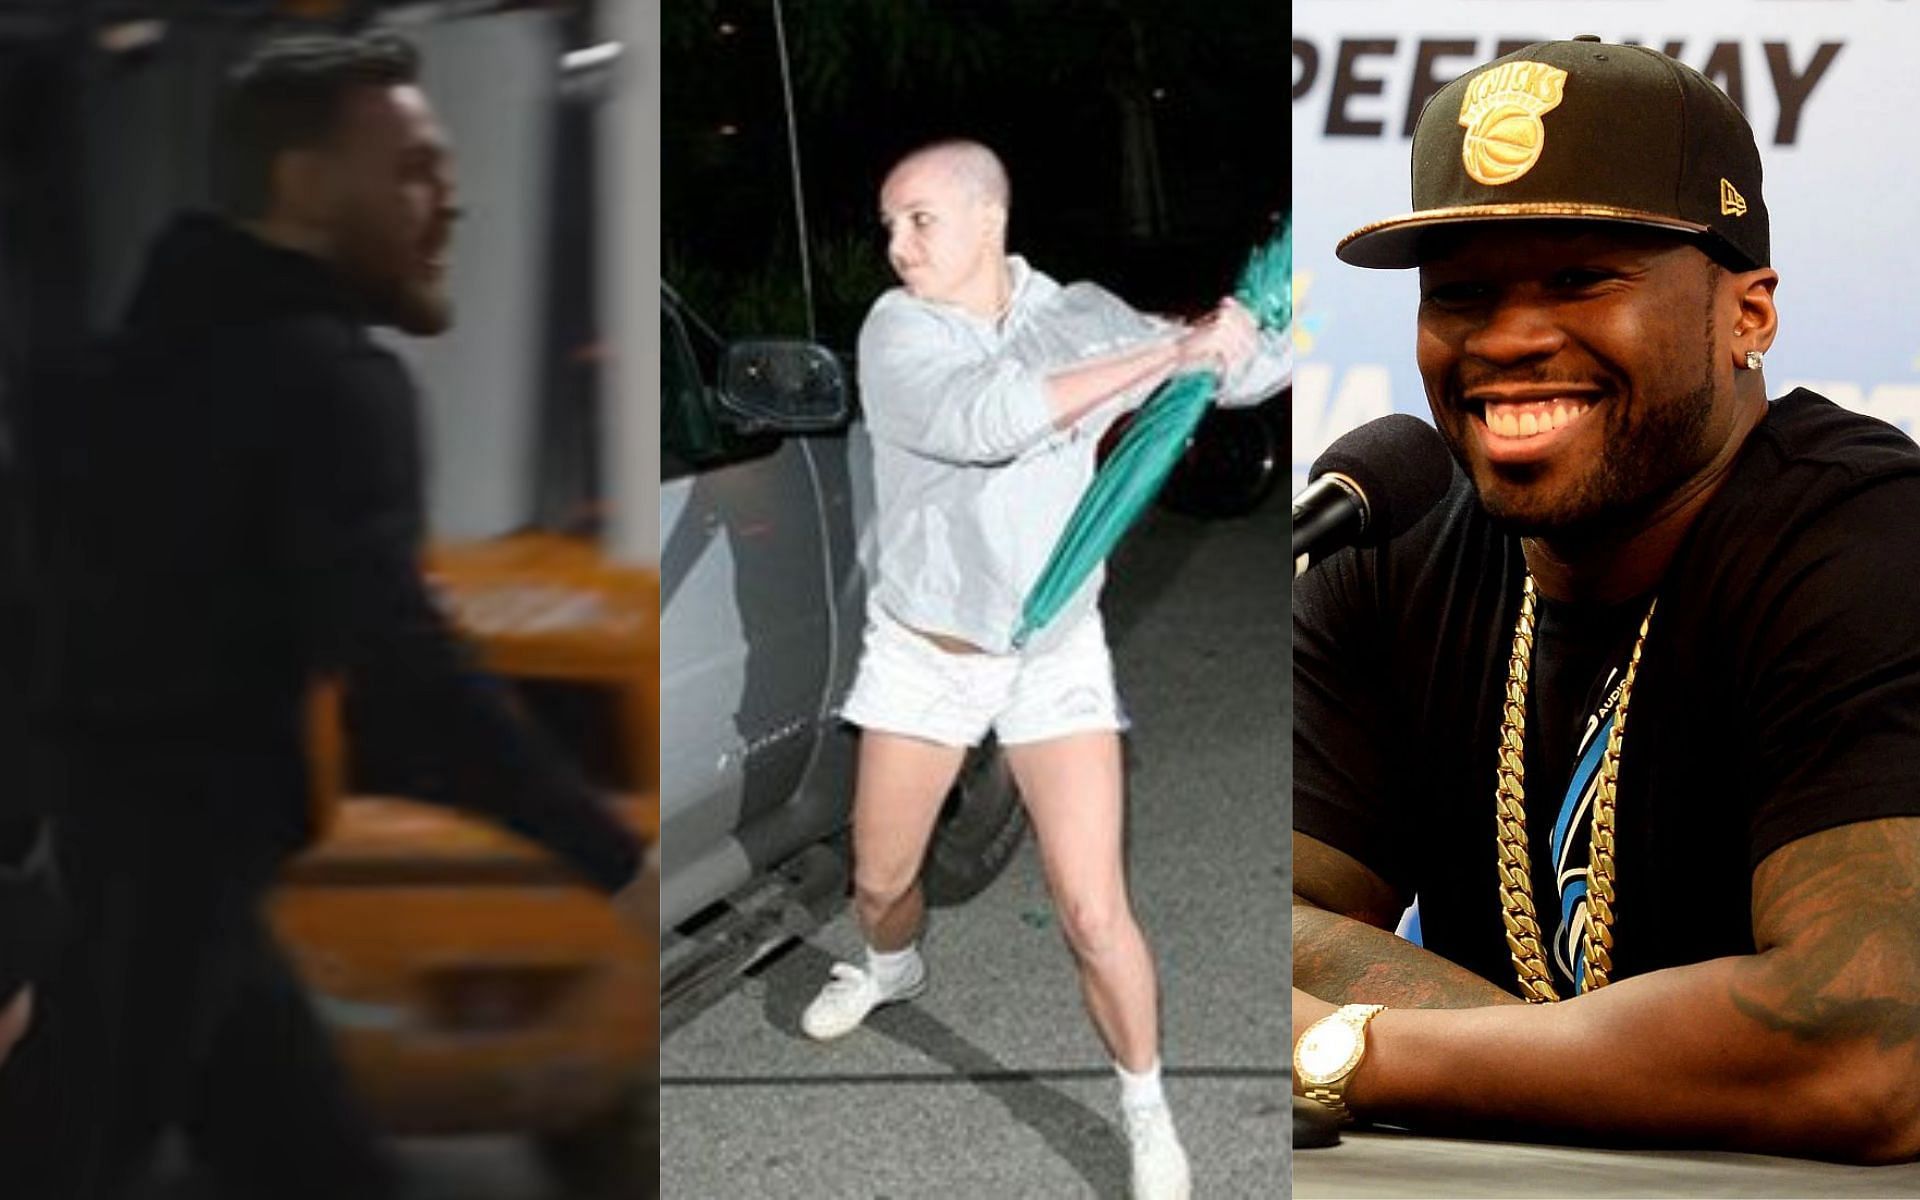 Conor McGregor (left), Britney Spears (center), and 50 Cent (right) [Images courtesy of UFC on YouTube, @Todaythatwas on Twitter, and Getty]